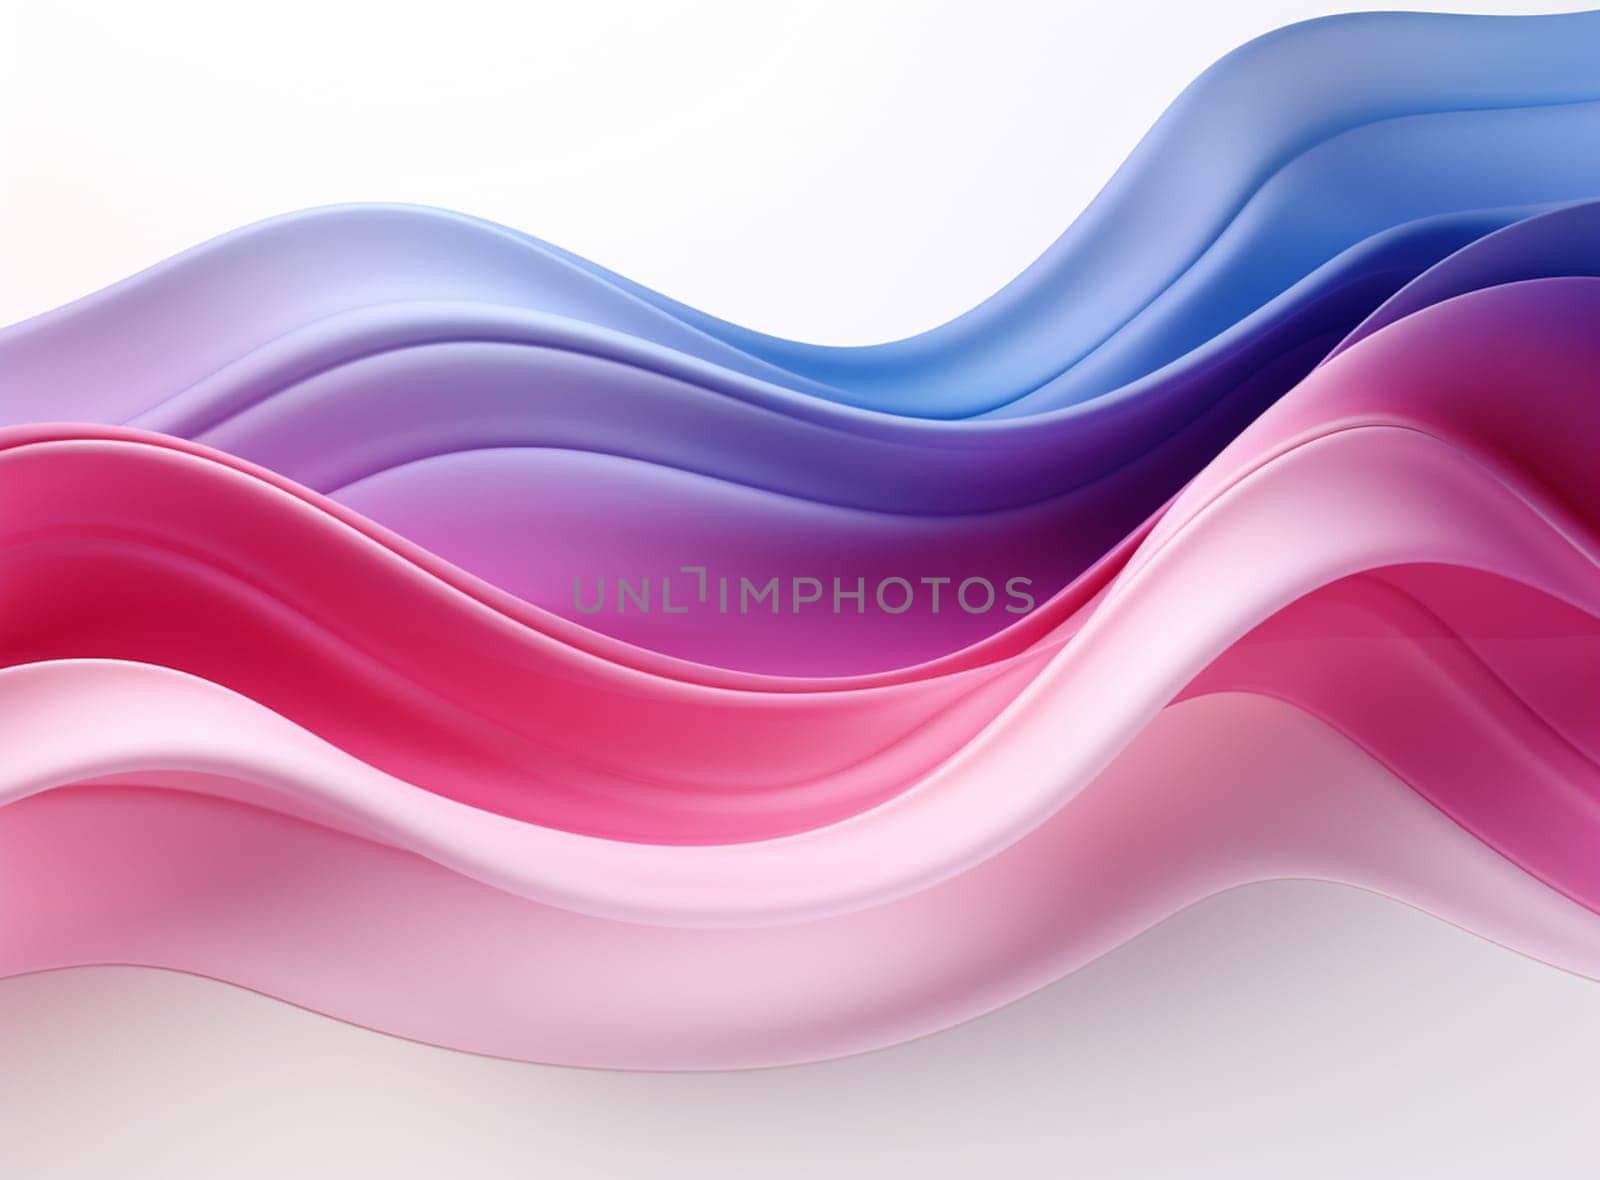 an abstract 3D image of digital waves in shades of Pink, Blue and purple - wave illustration. by Andelov13